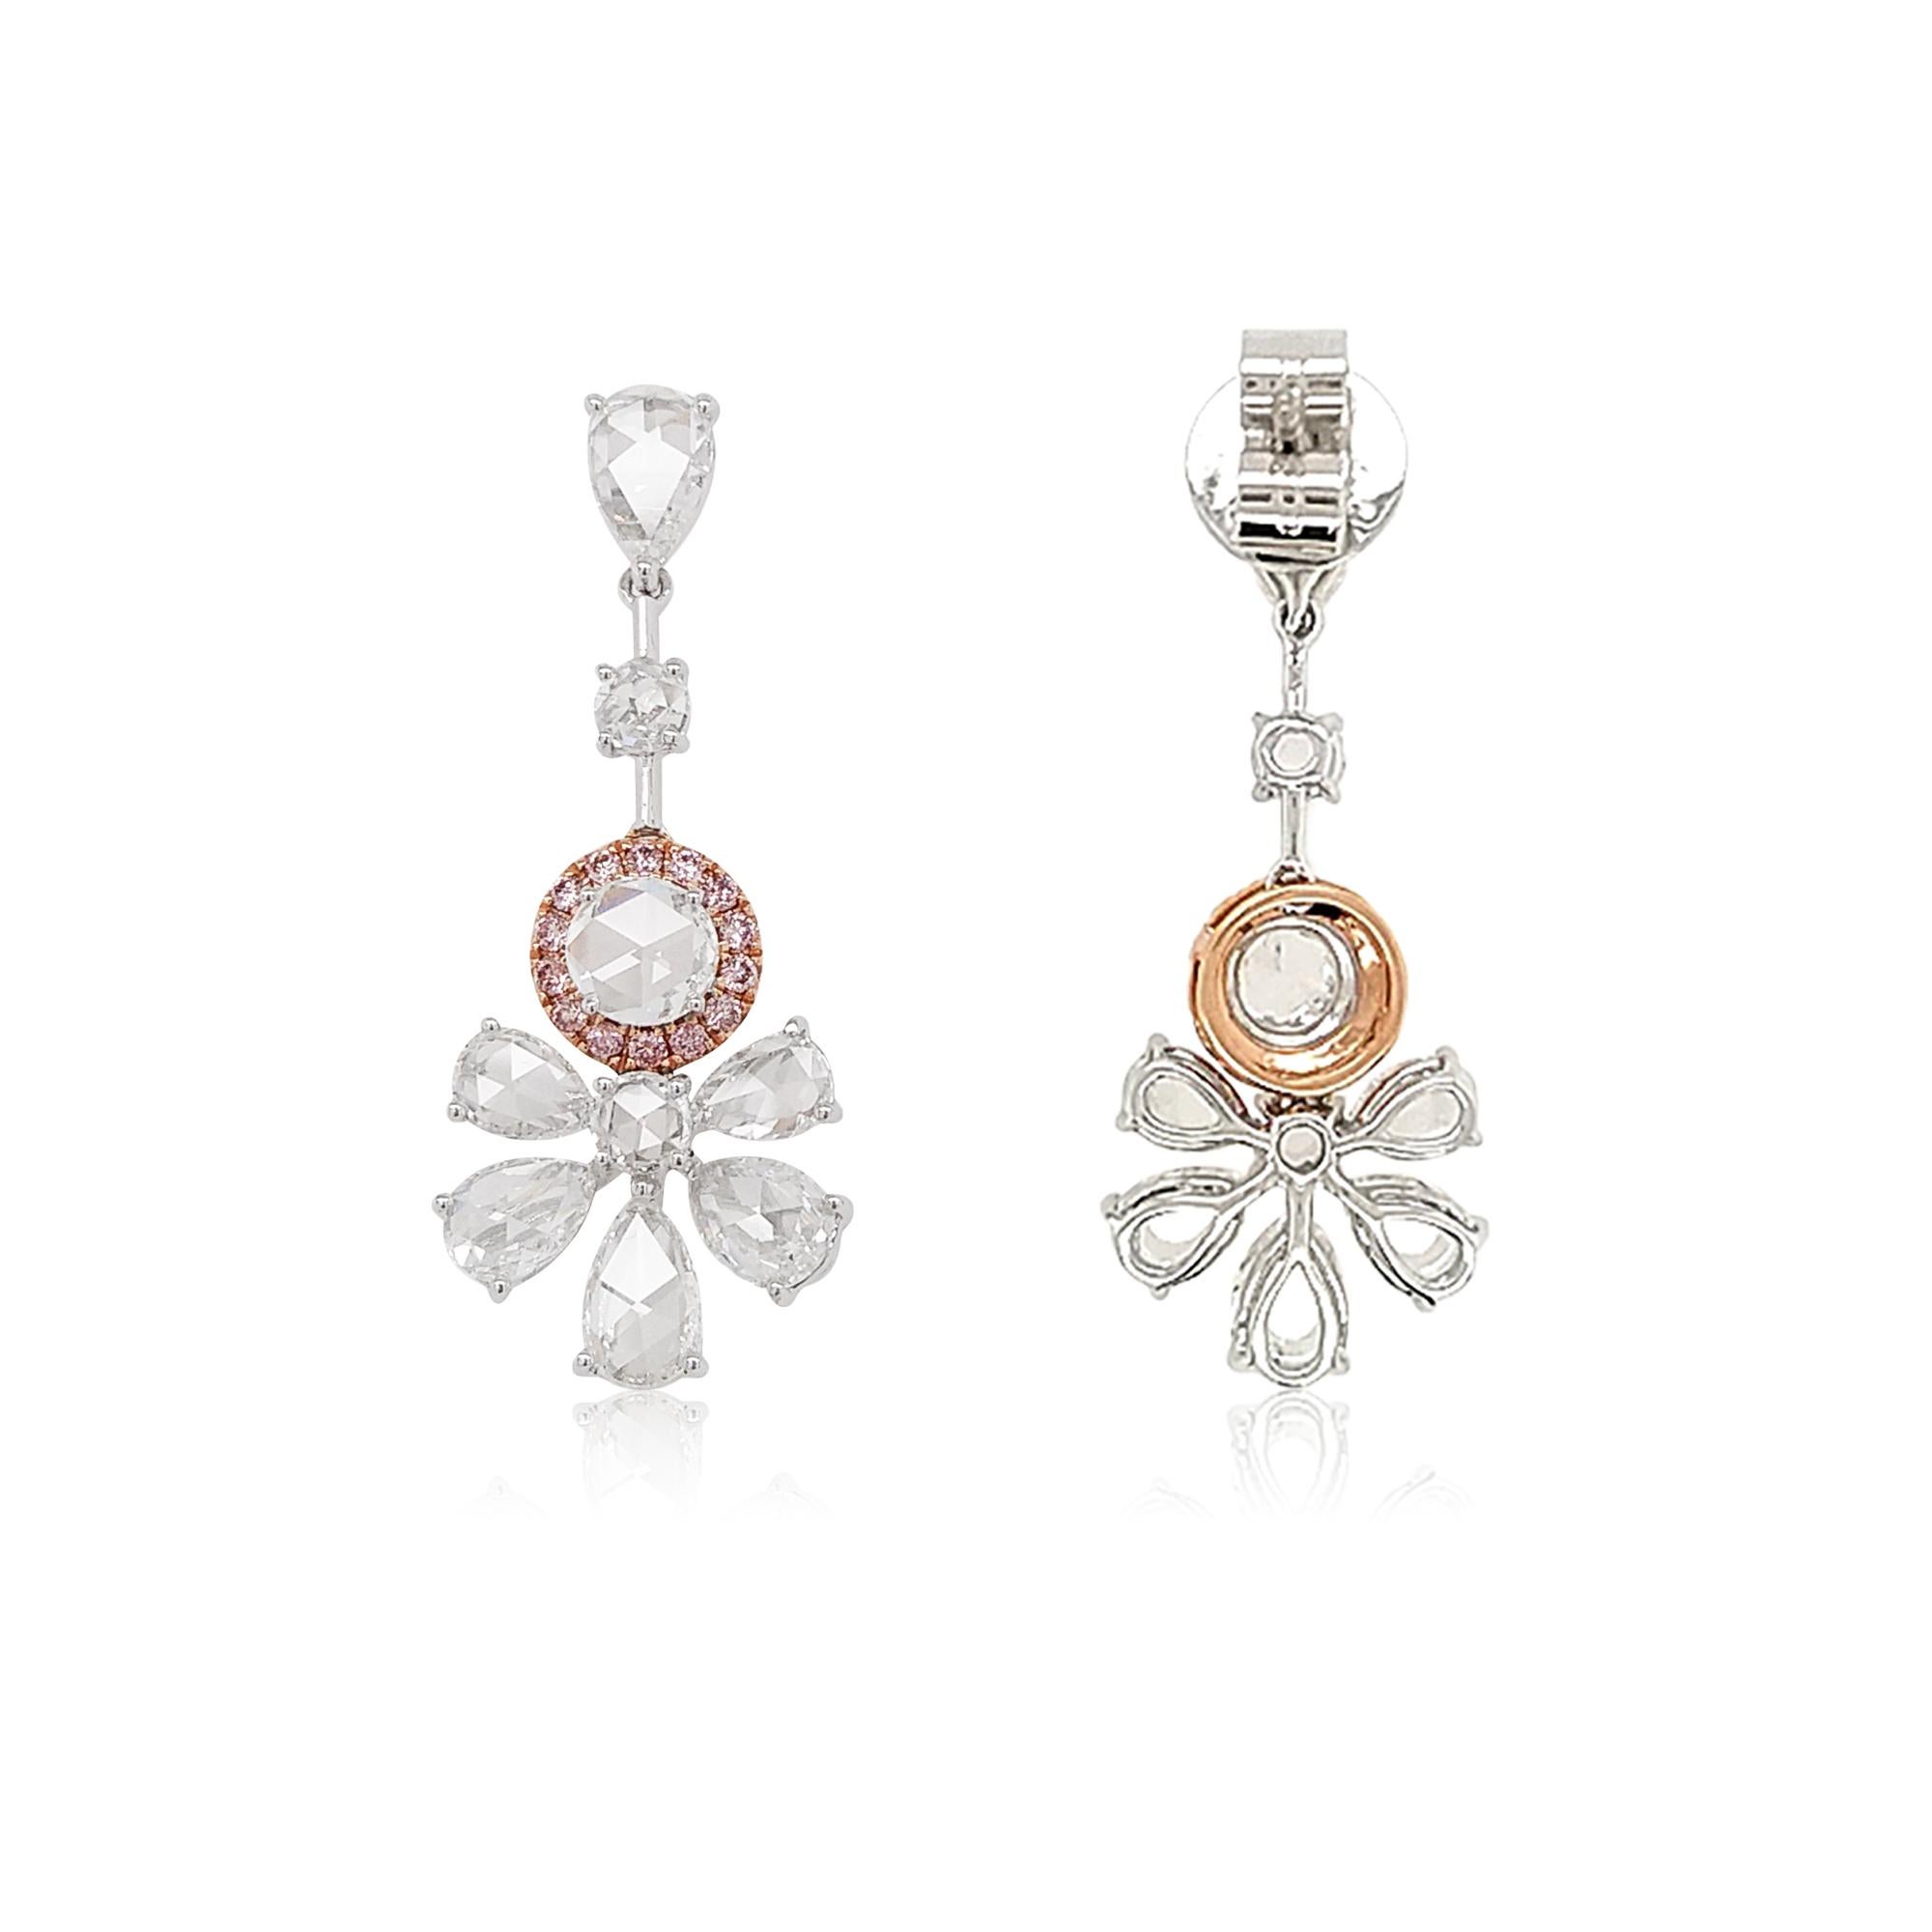 These flower-shaped diamond earrings present a charming look with white Rose-cut diamonds paired with Fancy Pink diamonds. A perfect set to grace your look for a fine Occasion.  
-	White Rose-cut diamonds - 4.59 carats 
-	Round Brilliant Cut Pink